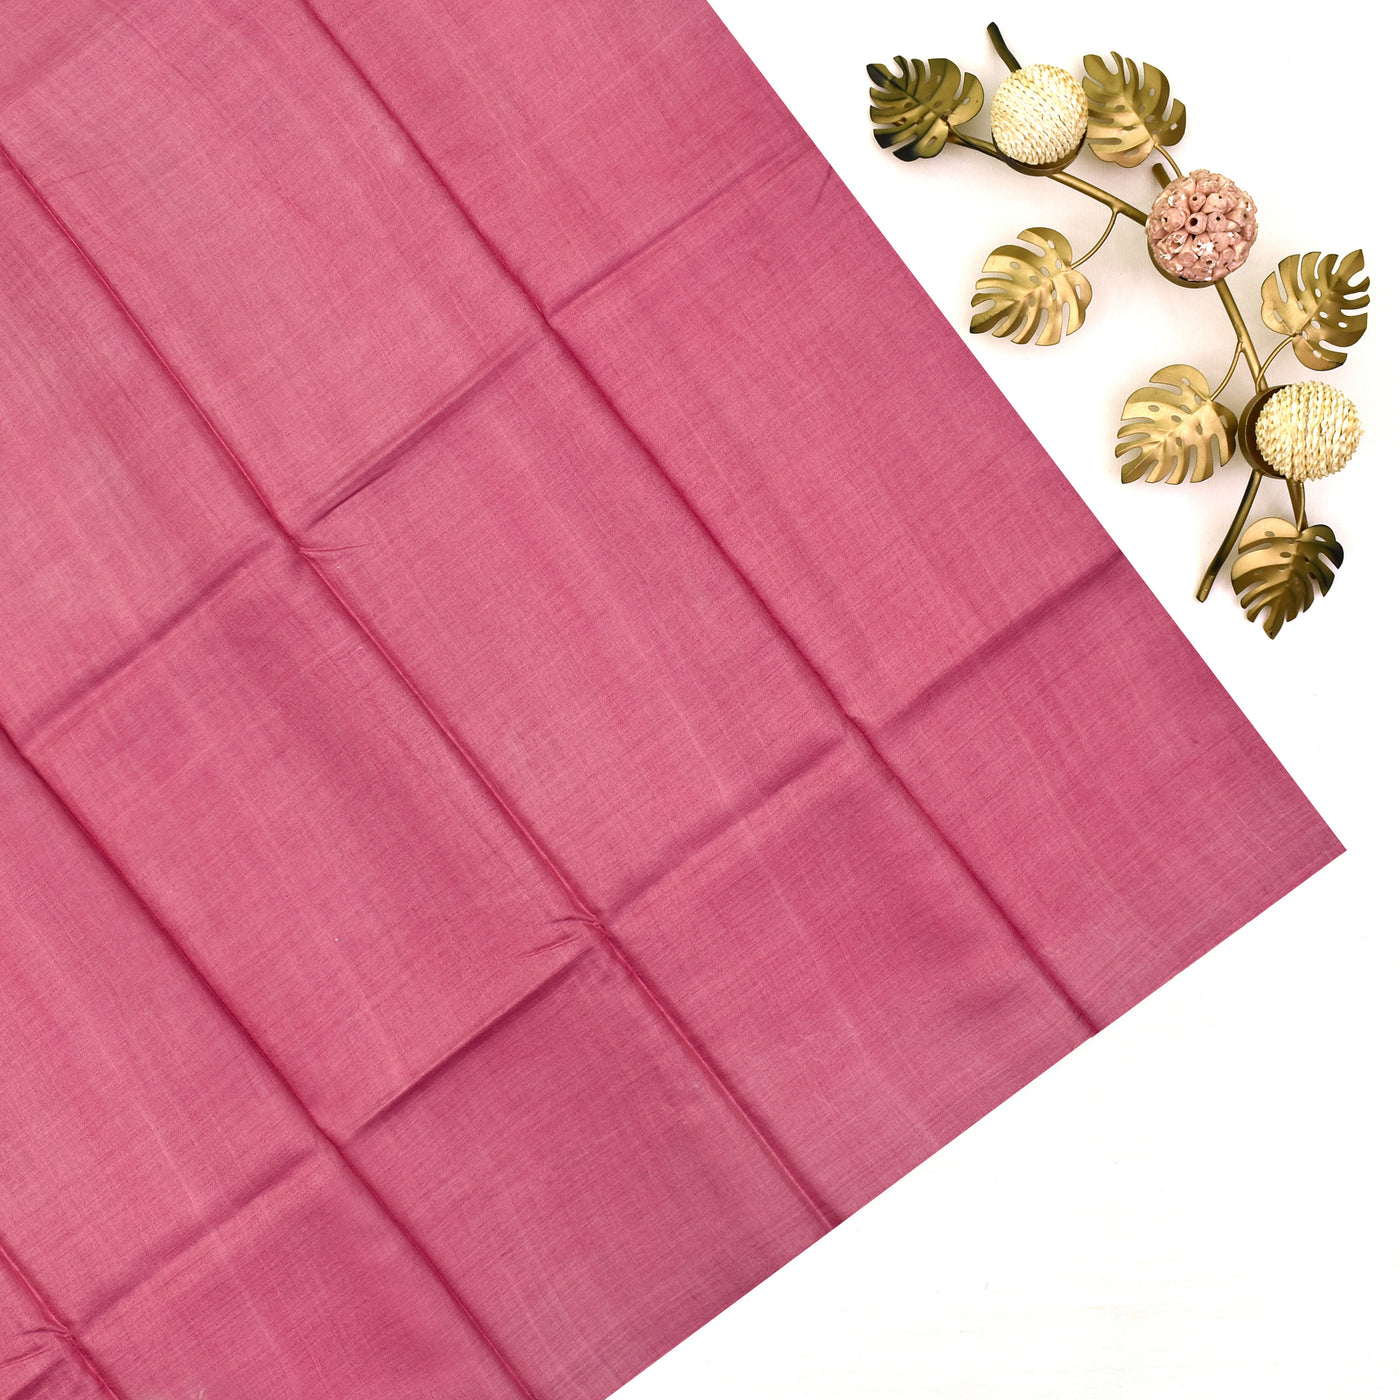 Off White Tussar Silk Saree with Baby Pink Plain Blouse